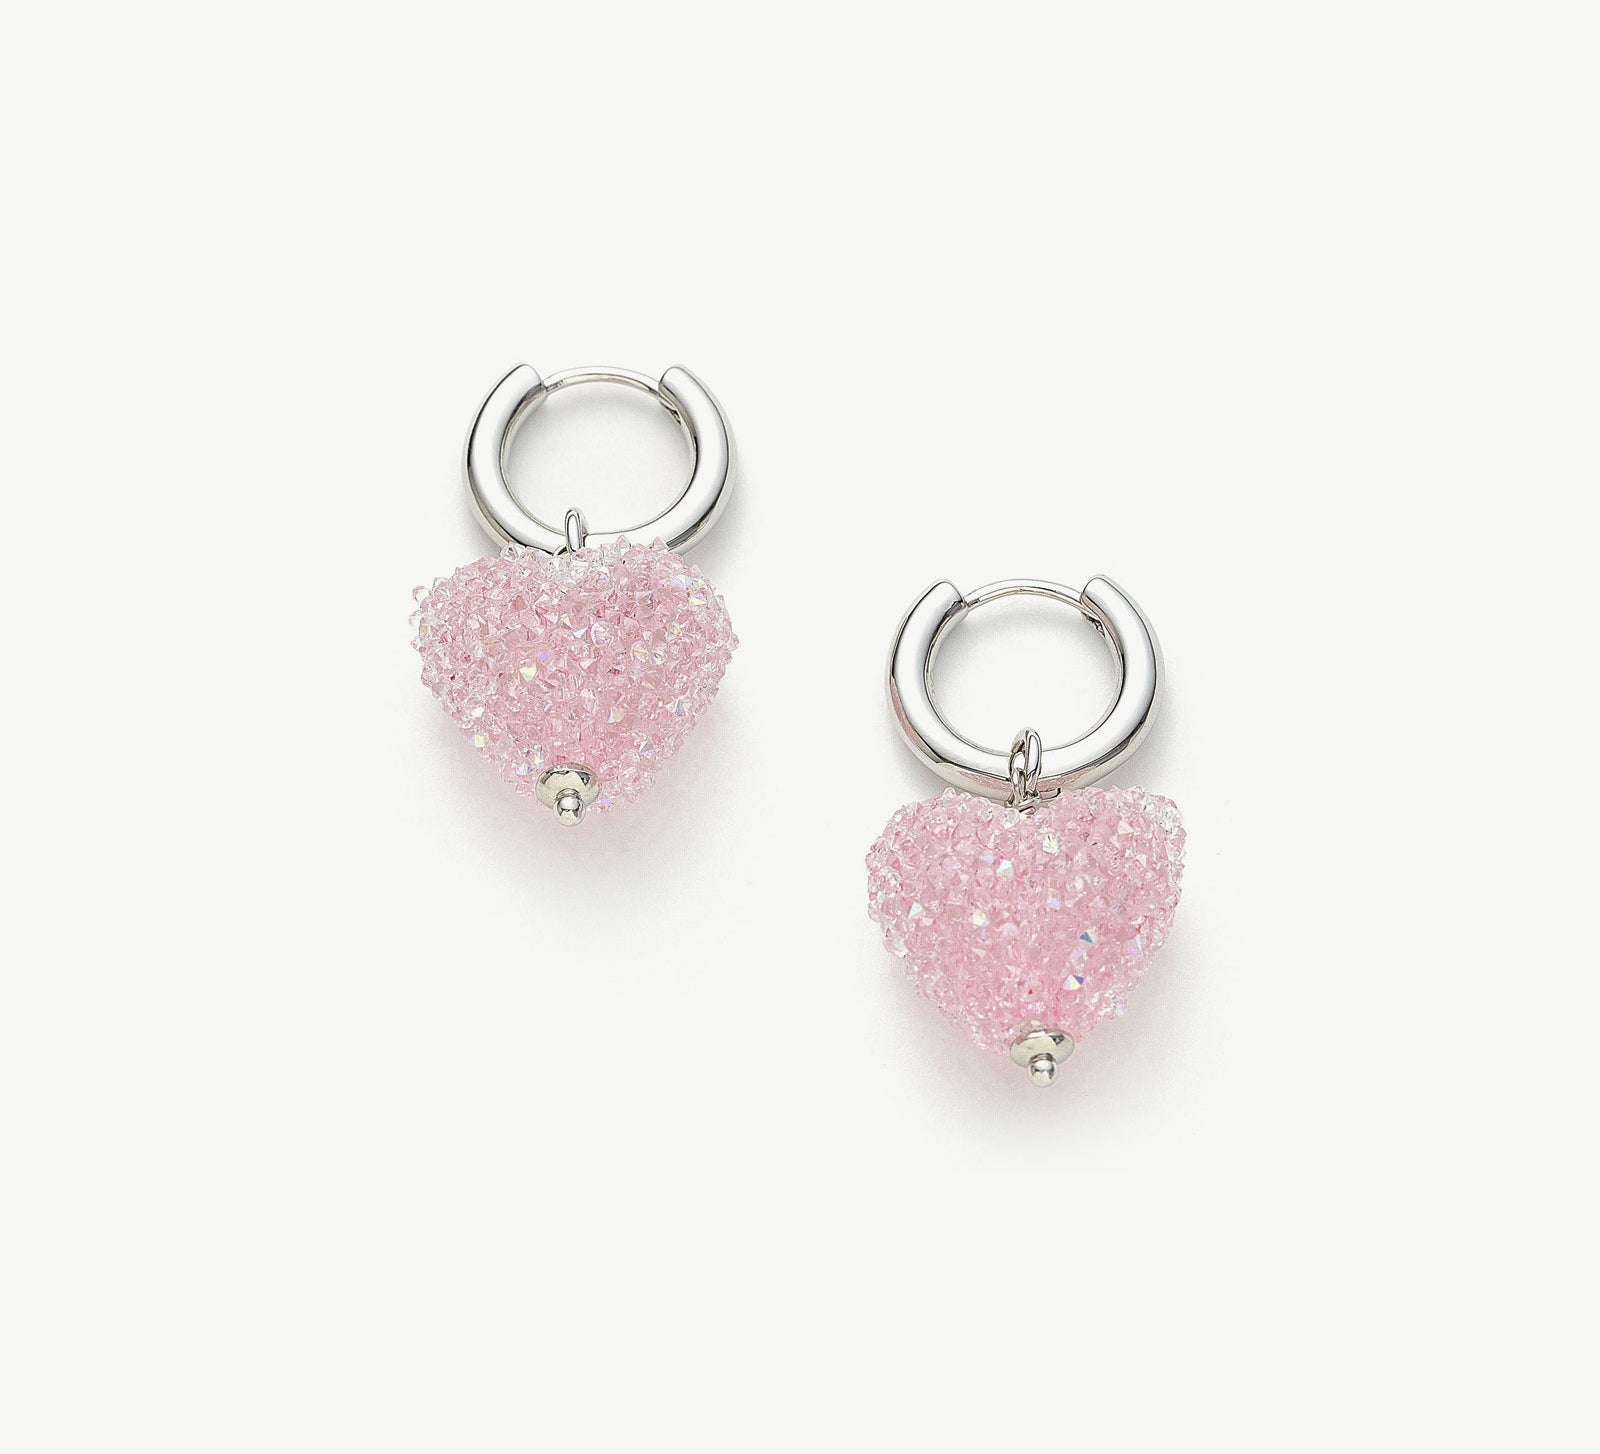 Shining Heart Hoop Earrings in Pink, radiating with radiant charm, these hoops feature heart shapes in a delightful shade of pink for a romantic and luminous look